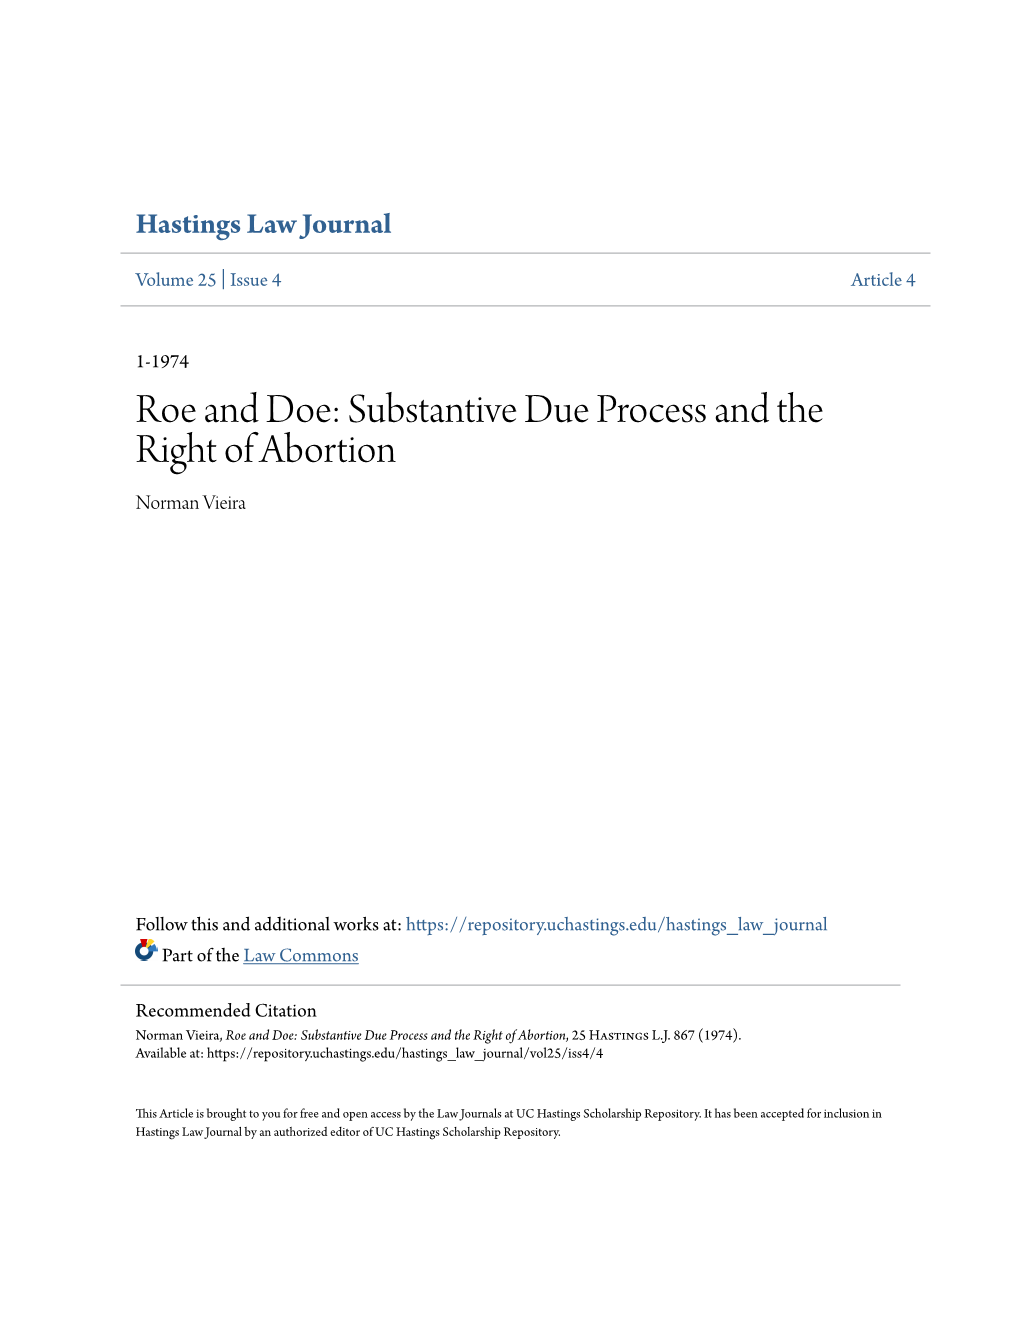 Roe and Doe: Substantive Due Process and the Right of Abortion Norman Vieira